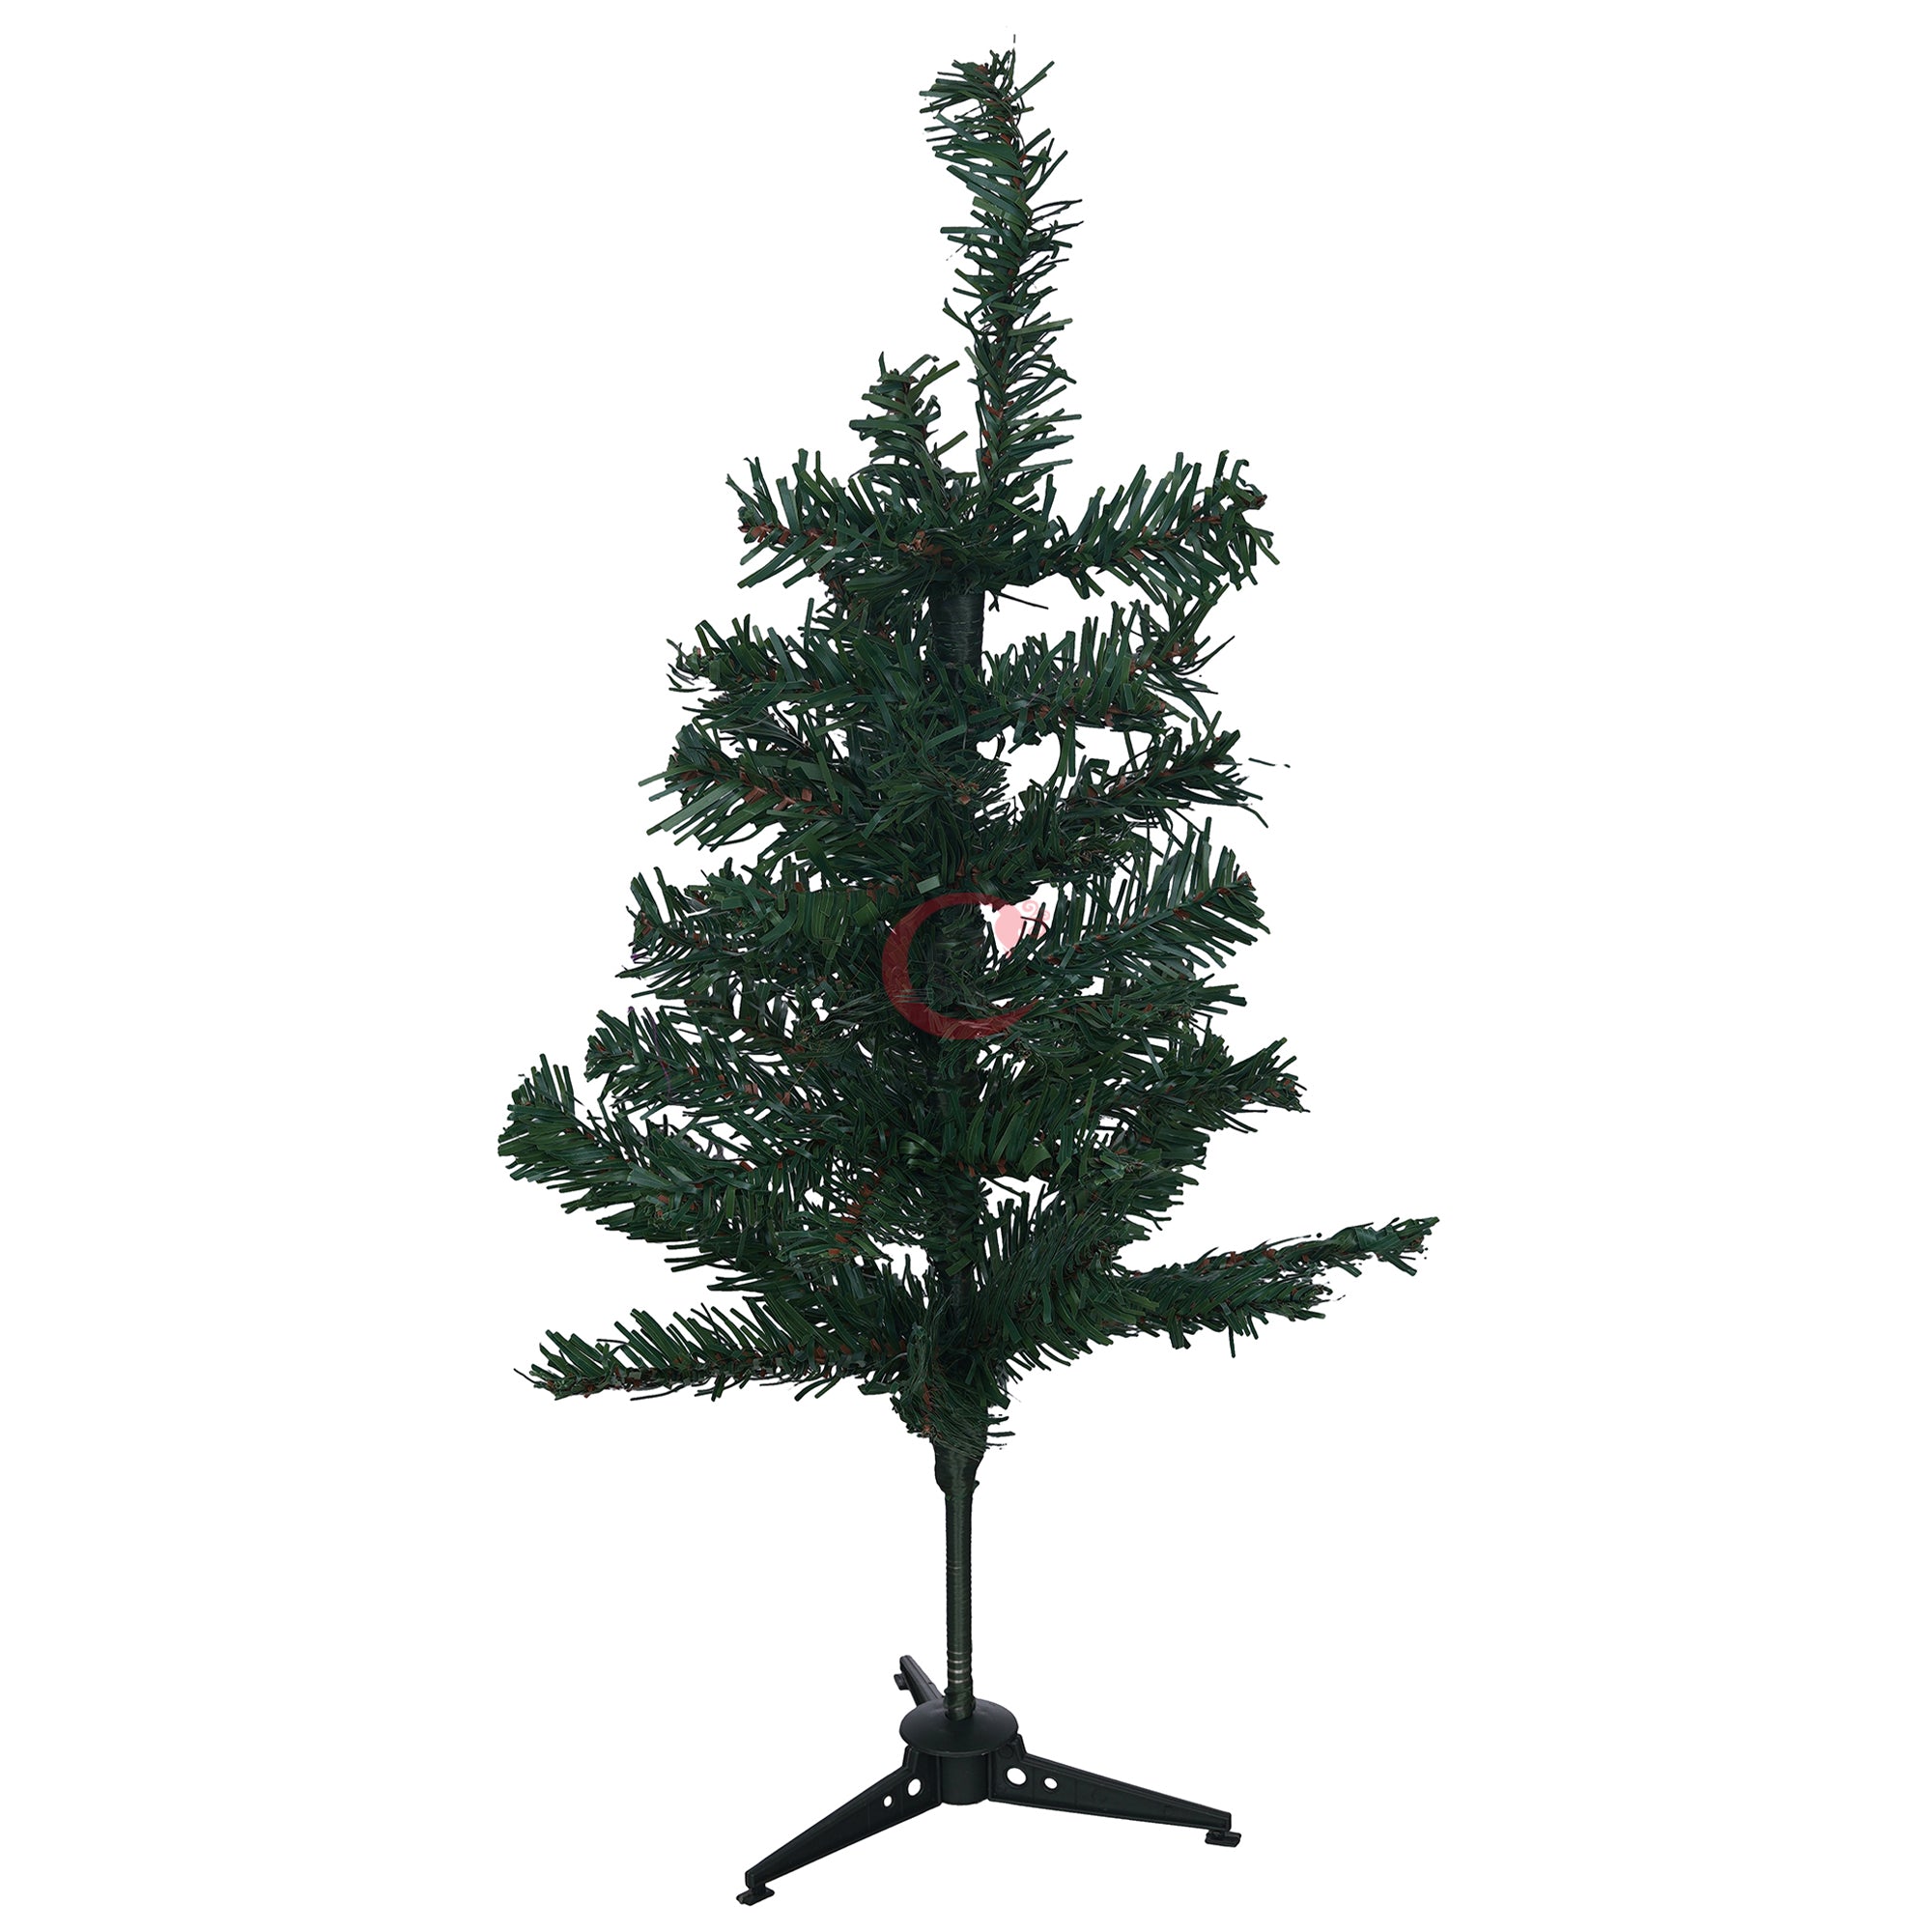 eCraftIndia 2 Feet Green Artificial Christmas Tree Xmas Pine Tree with Stand and 60 Christmas Decoration Ornaments Props - Merry Christmas Decoration Item for Home, Office, and Church 8